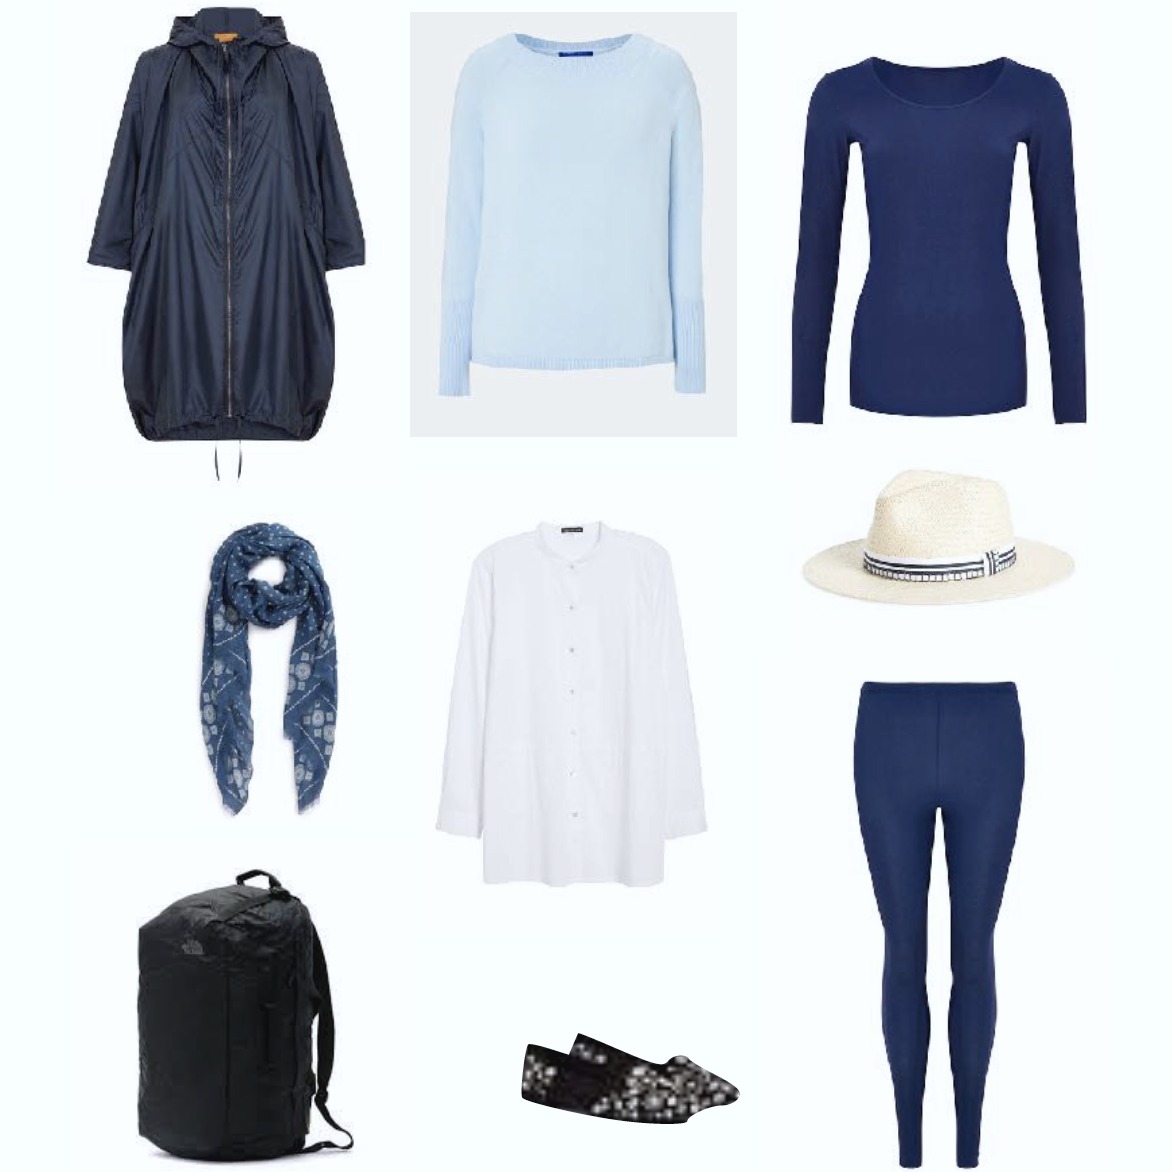 Capsule wardrobe for a trip to France